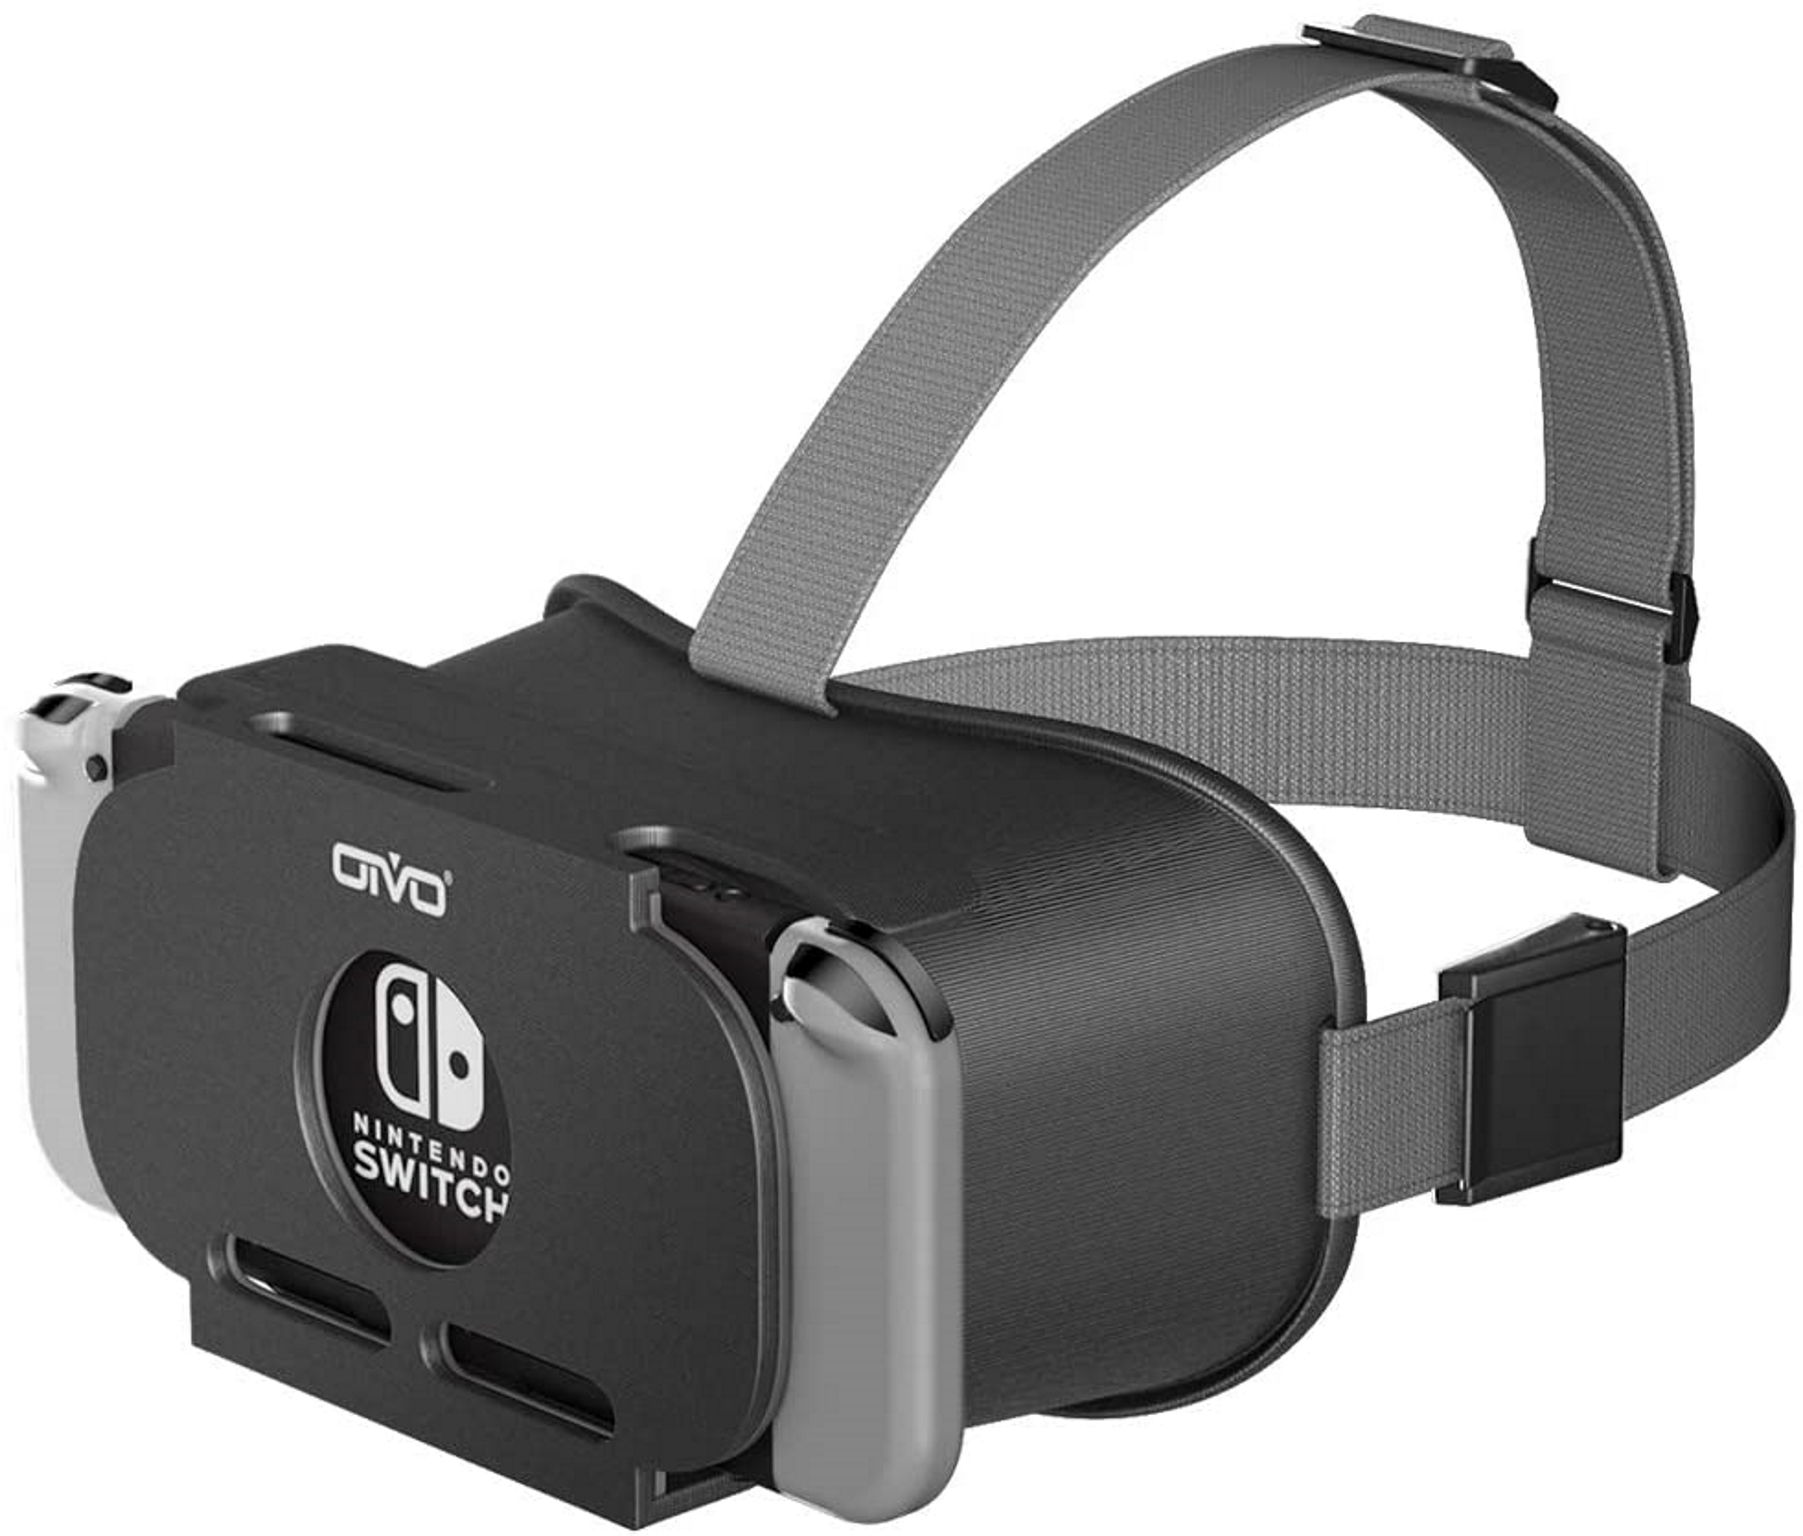 Oivo 3d Vr Switch Headset